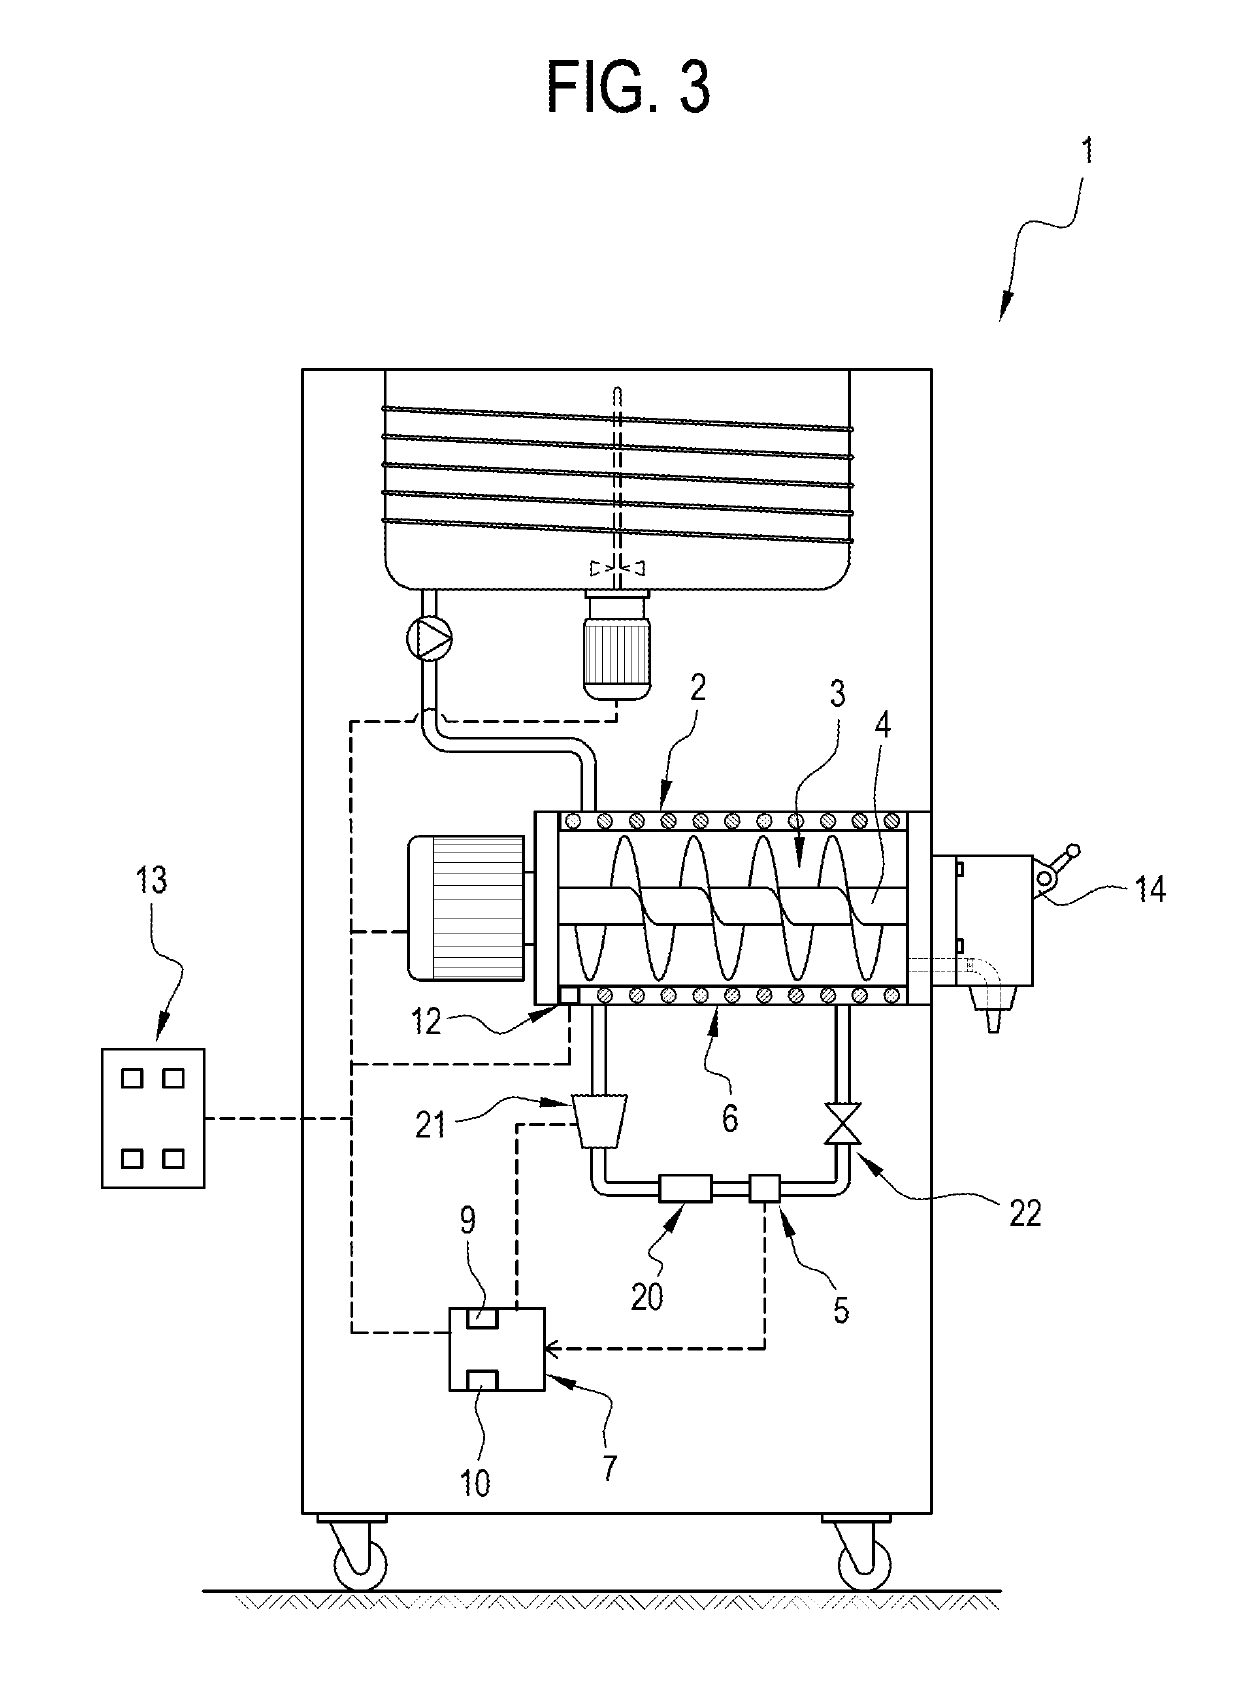 Machine for making liquid or semi-liquid food products and production system comprising the machine